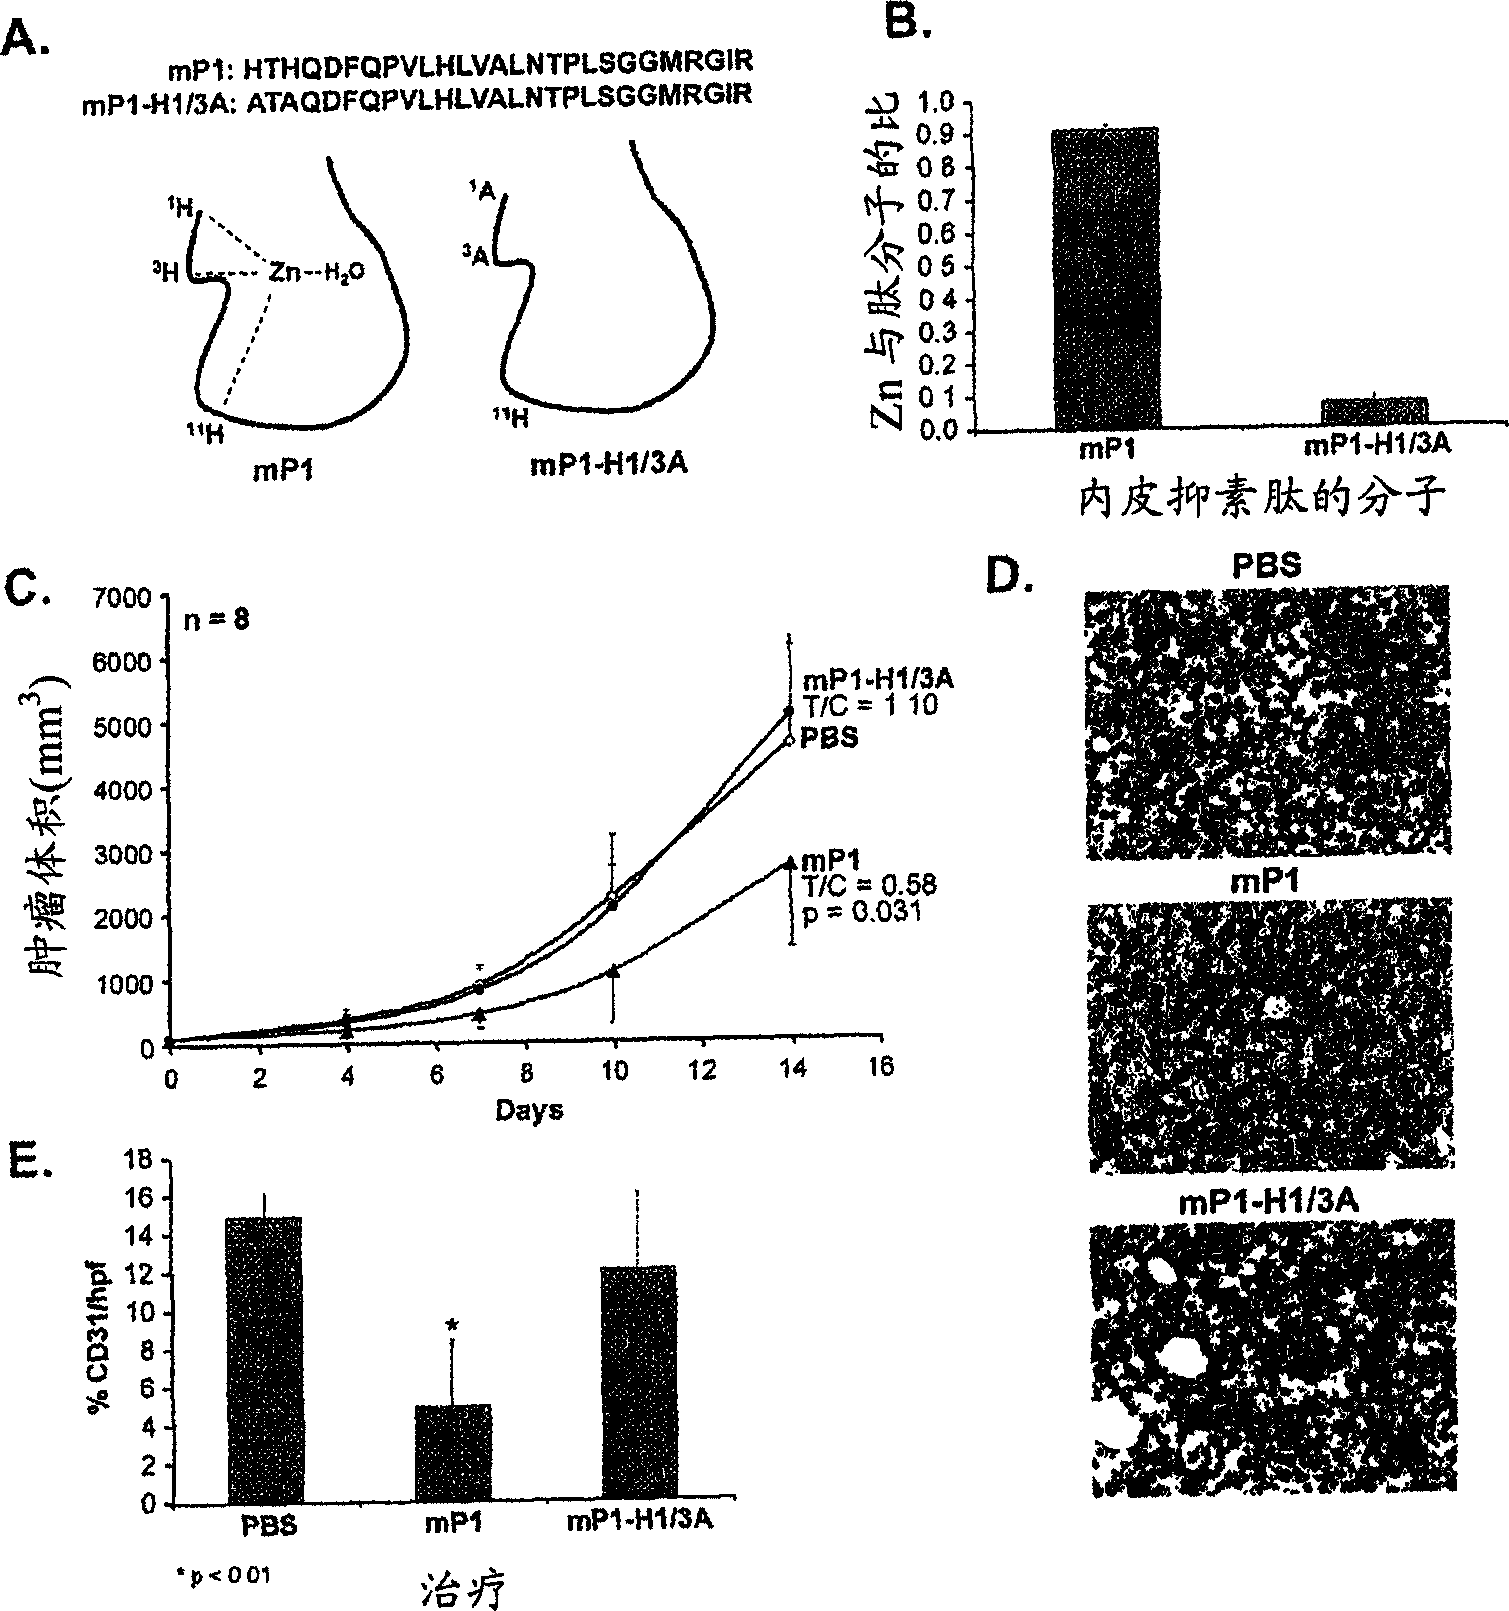 Anti-angiogenic peptides from the N-terminus of endostatin